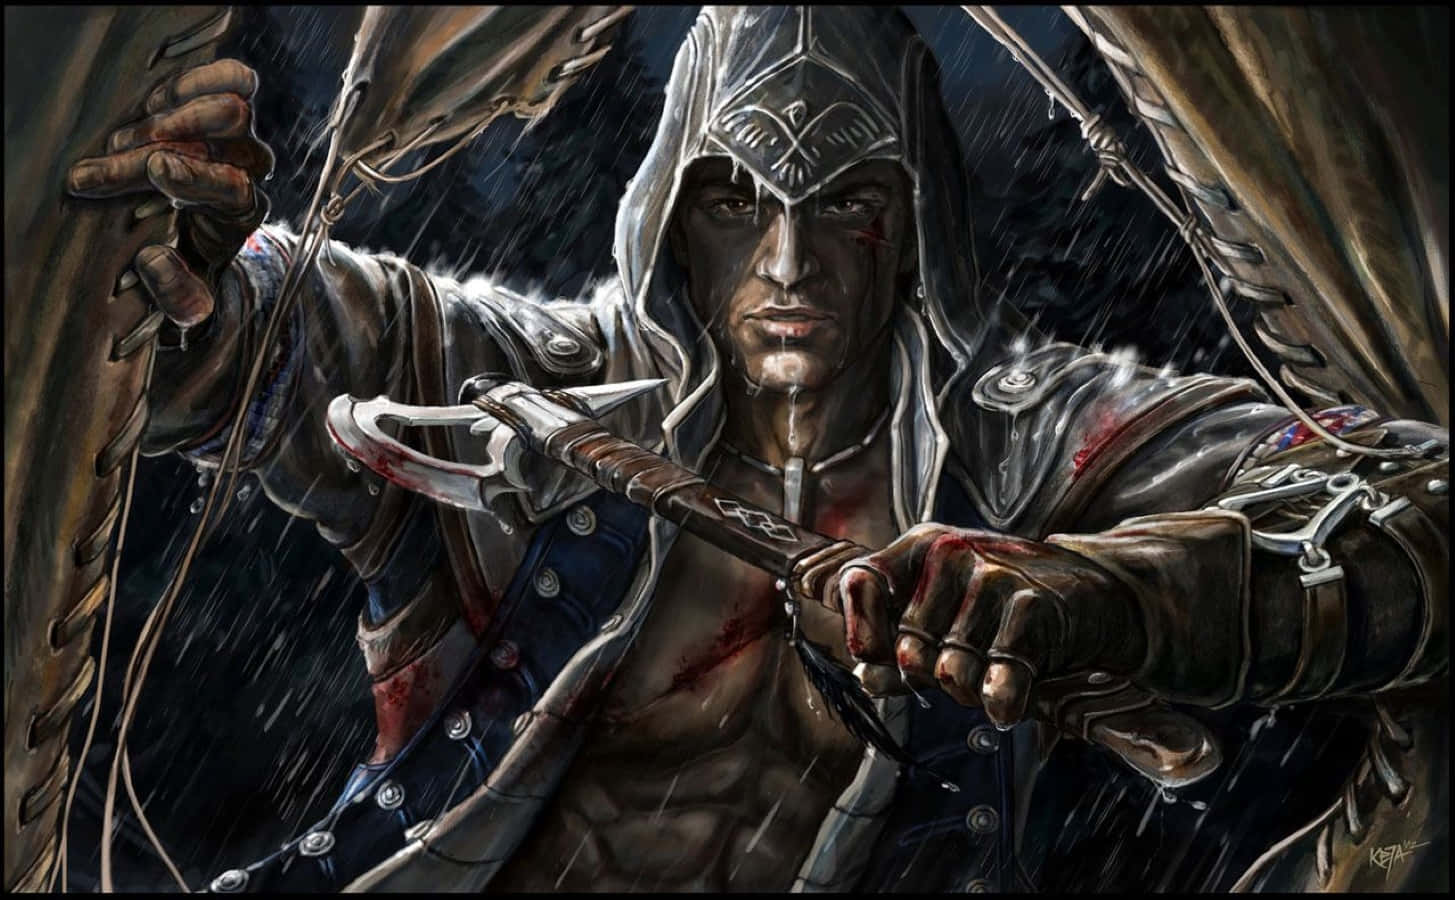 Connor Kenway striking a powerful pose in Assassin’s Creed III Wallpaper